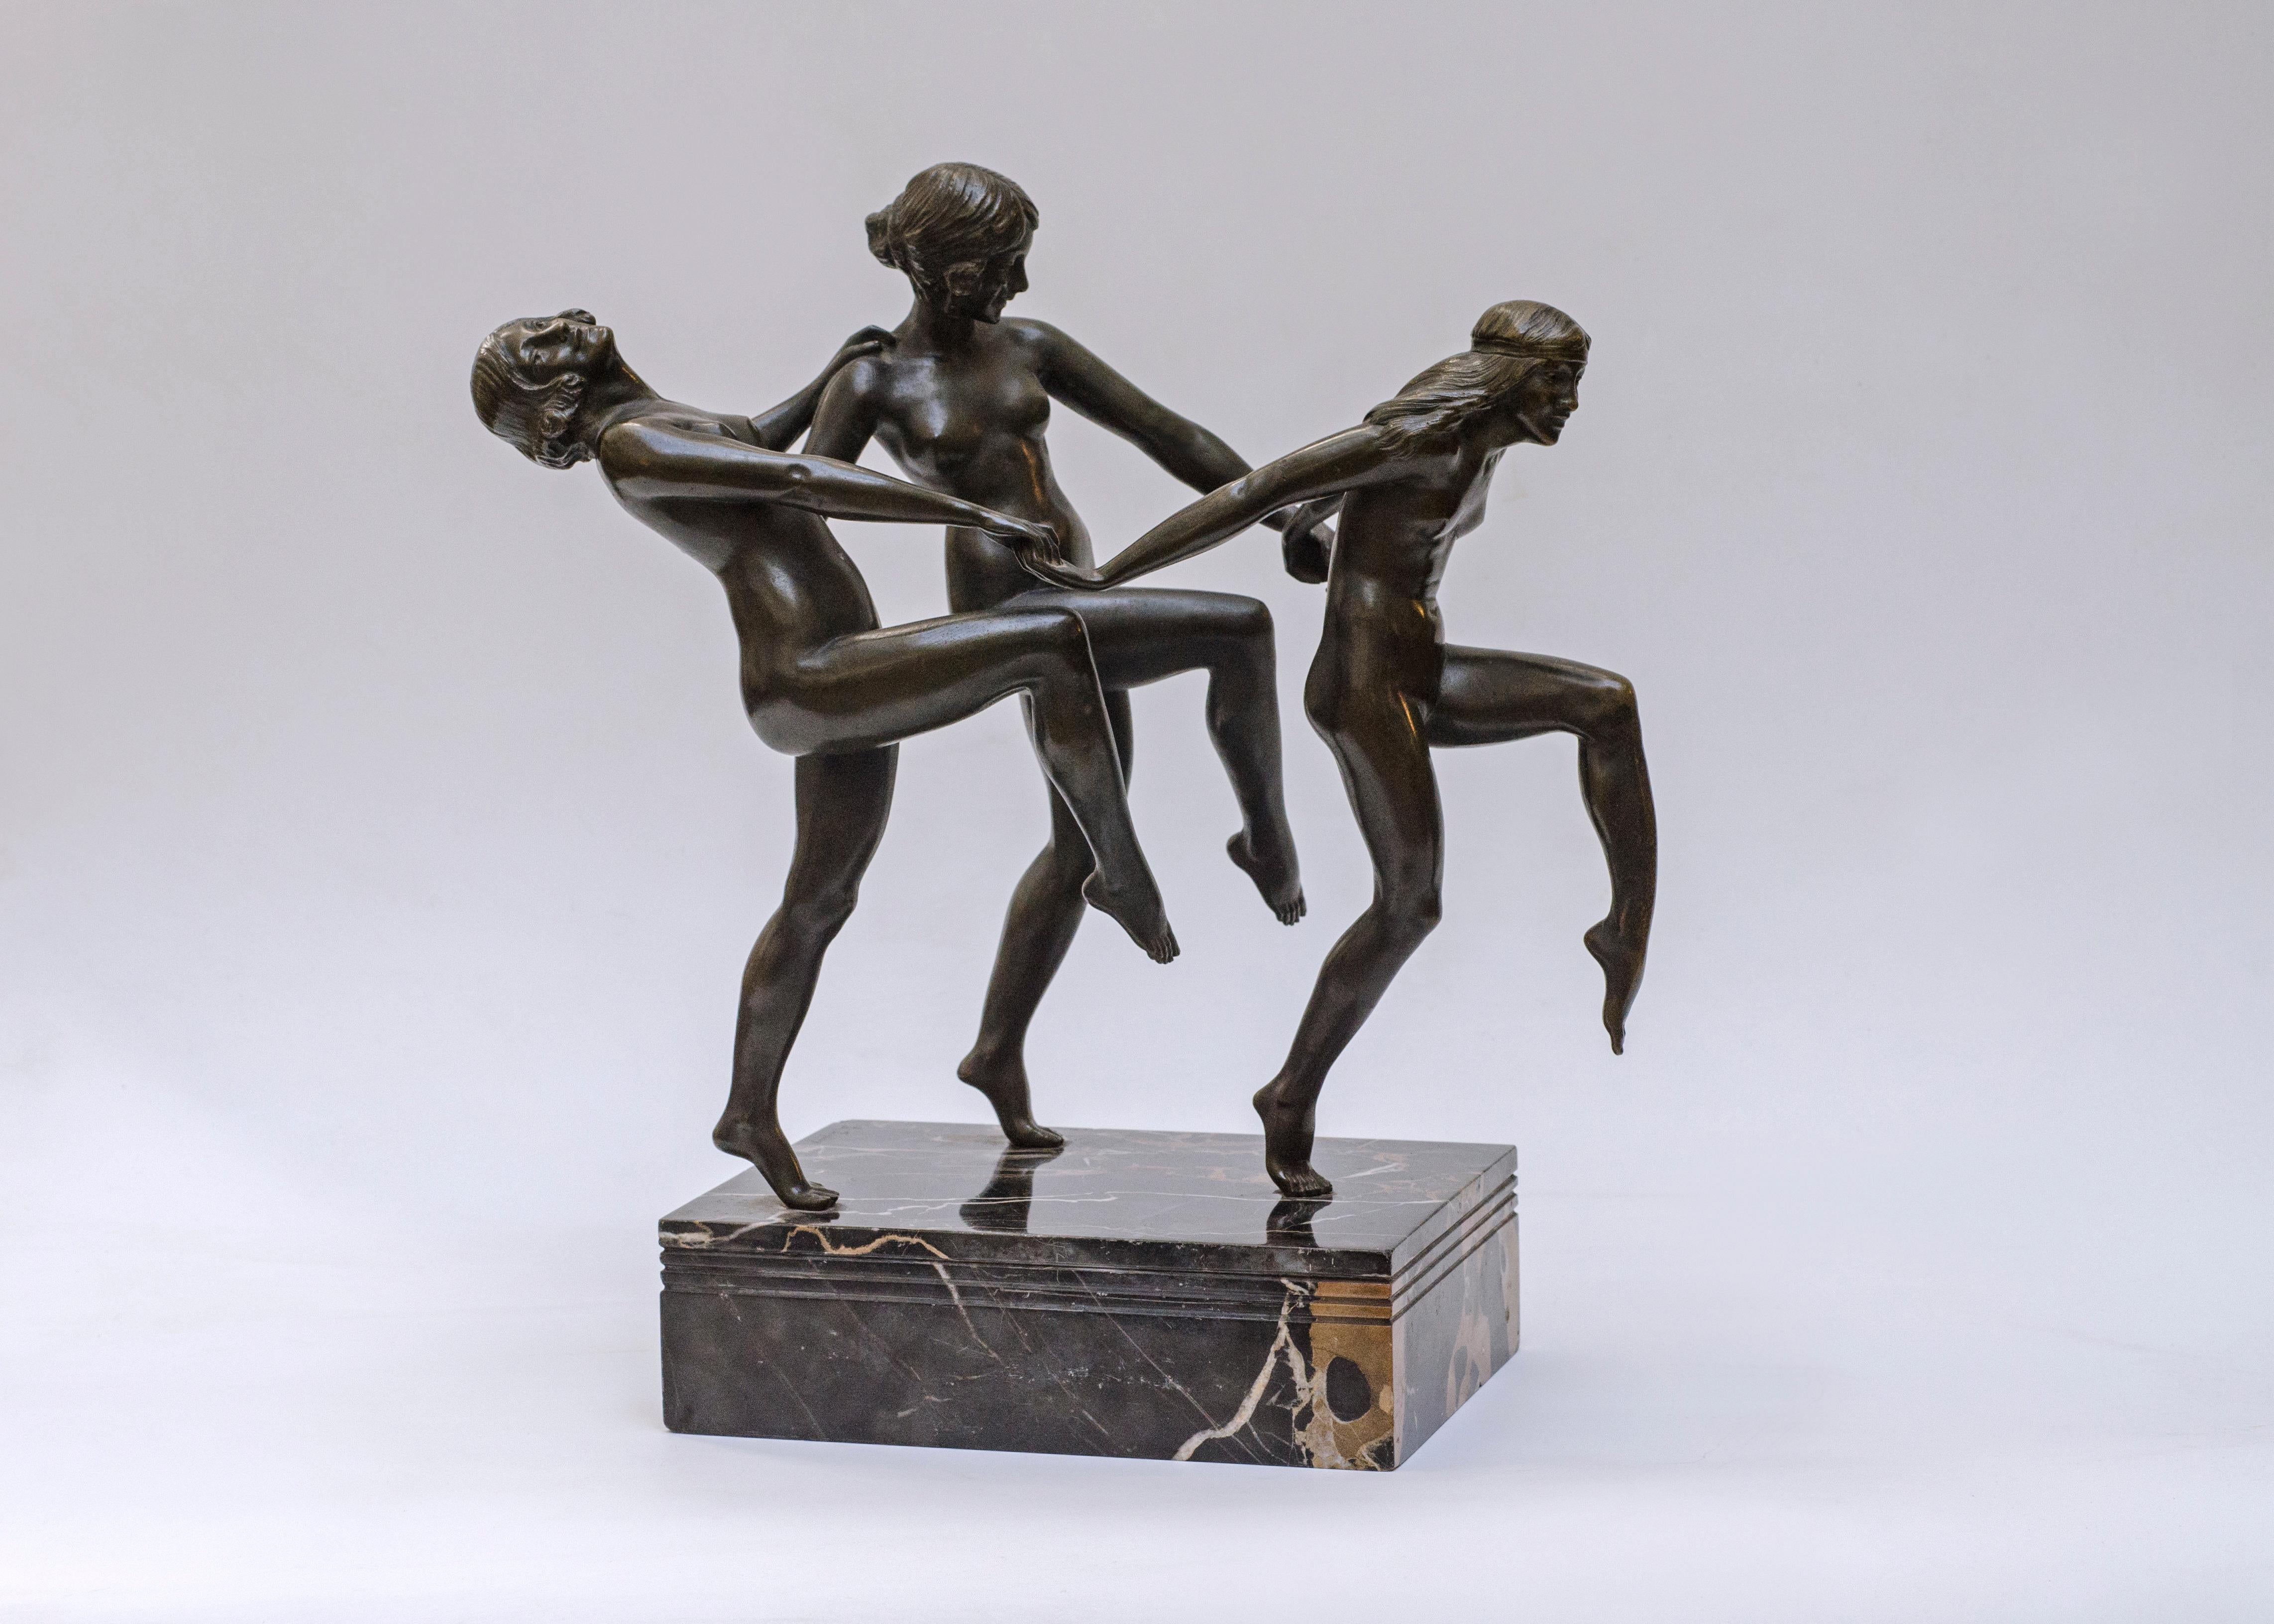 Art Deco sculpture called “The Dance”, made of brown patinated bronze with a Portoro marble base. Made by Pierre Le Faguays (1892-1962).

Signed Le Faguays.

France, circa 1920.